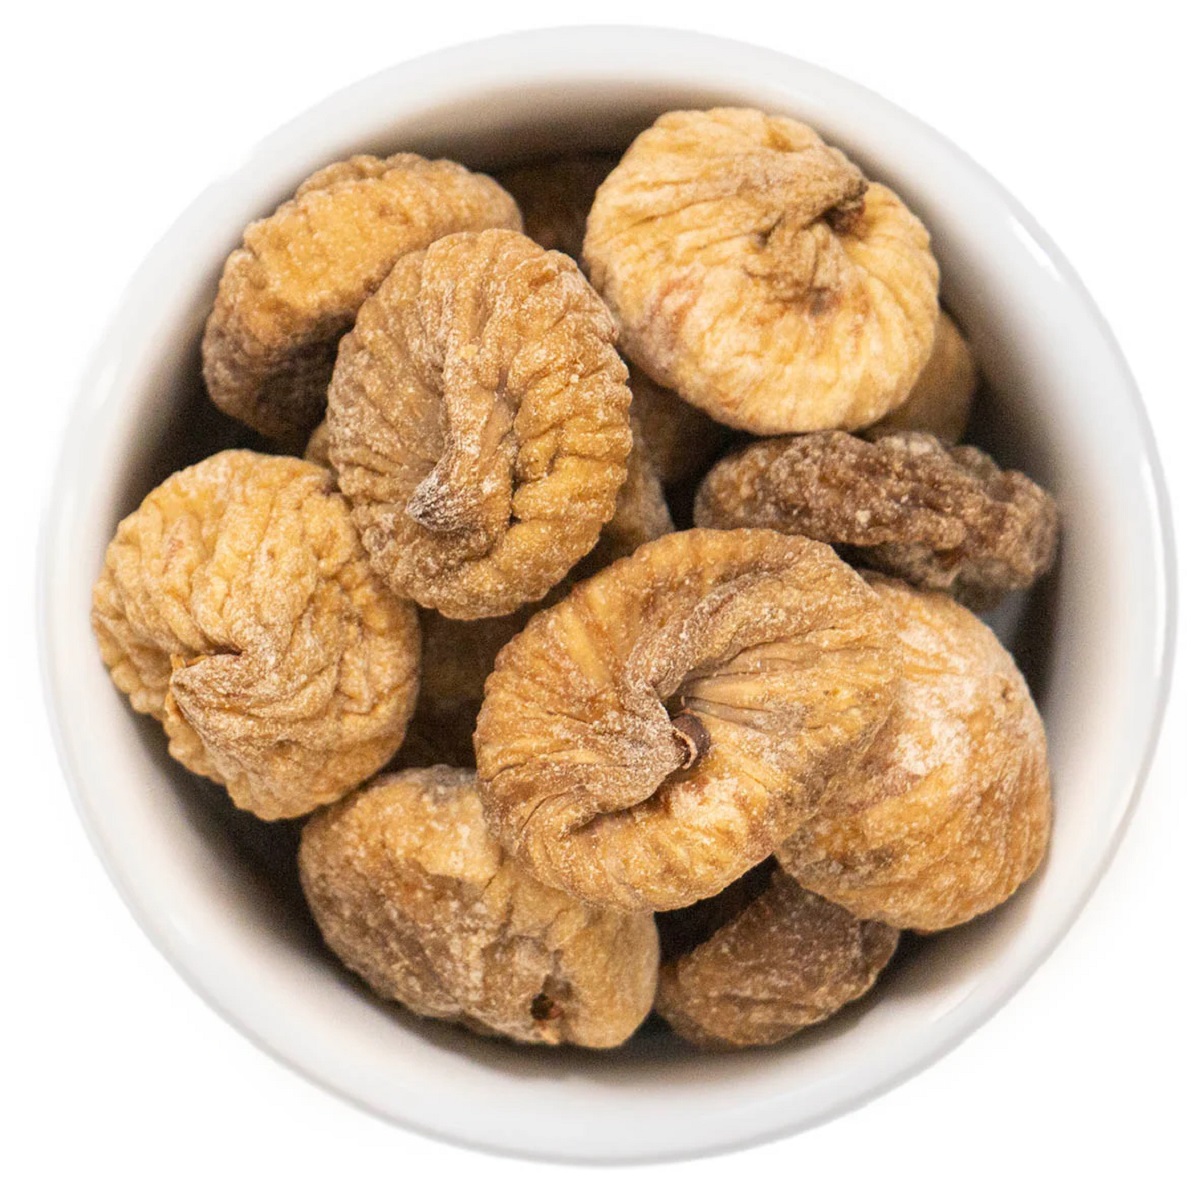 Properties Of Dried Figs